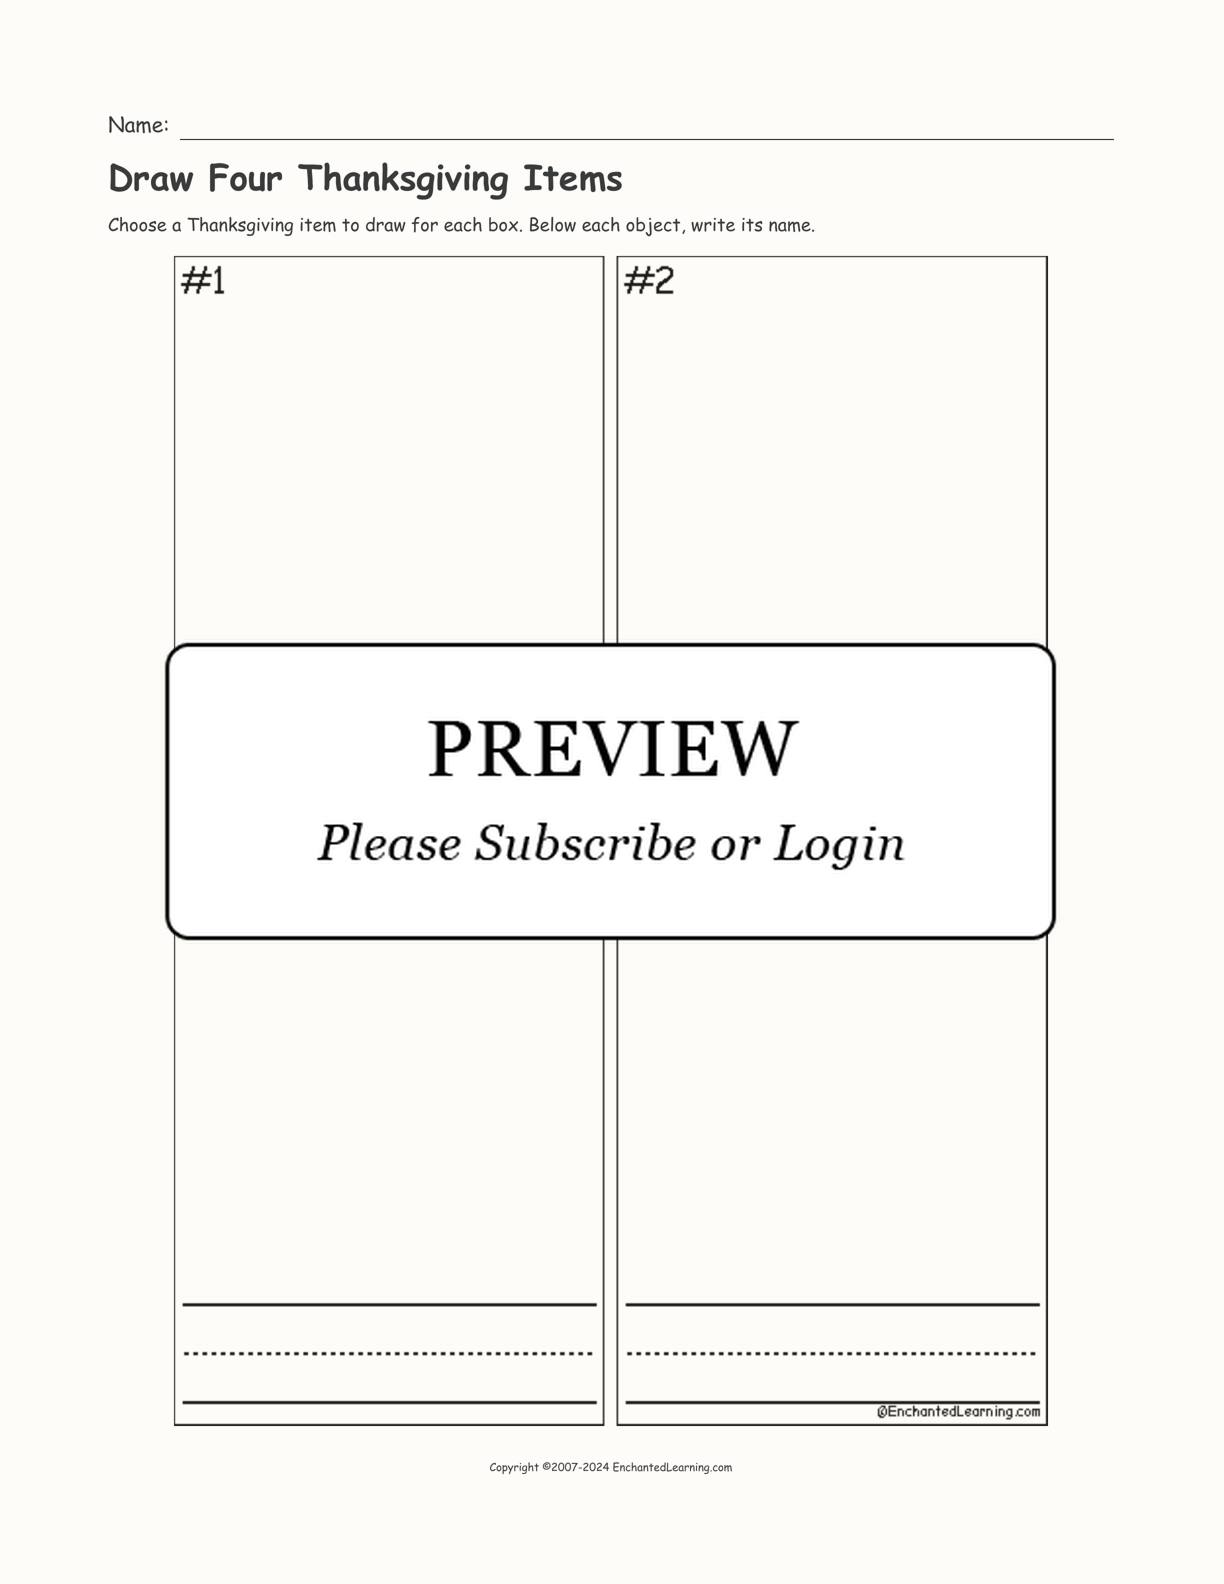 Draw Four Thanksgiving Items interactive printout page 1